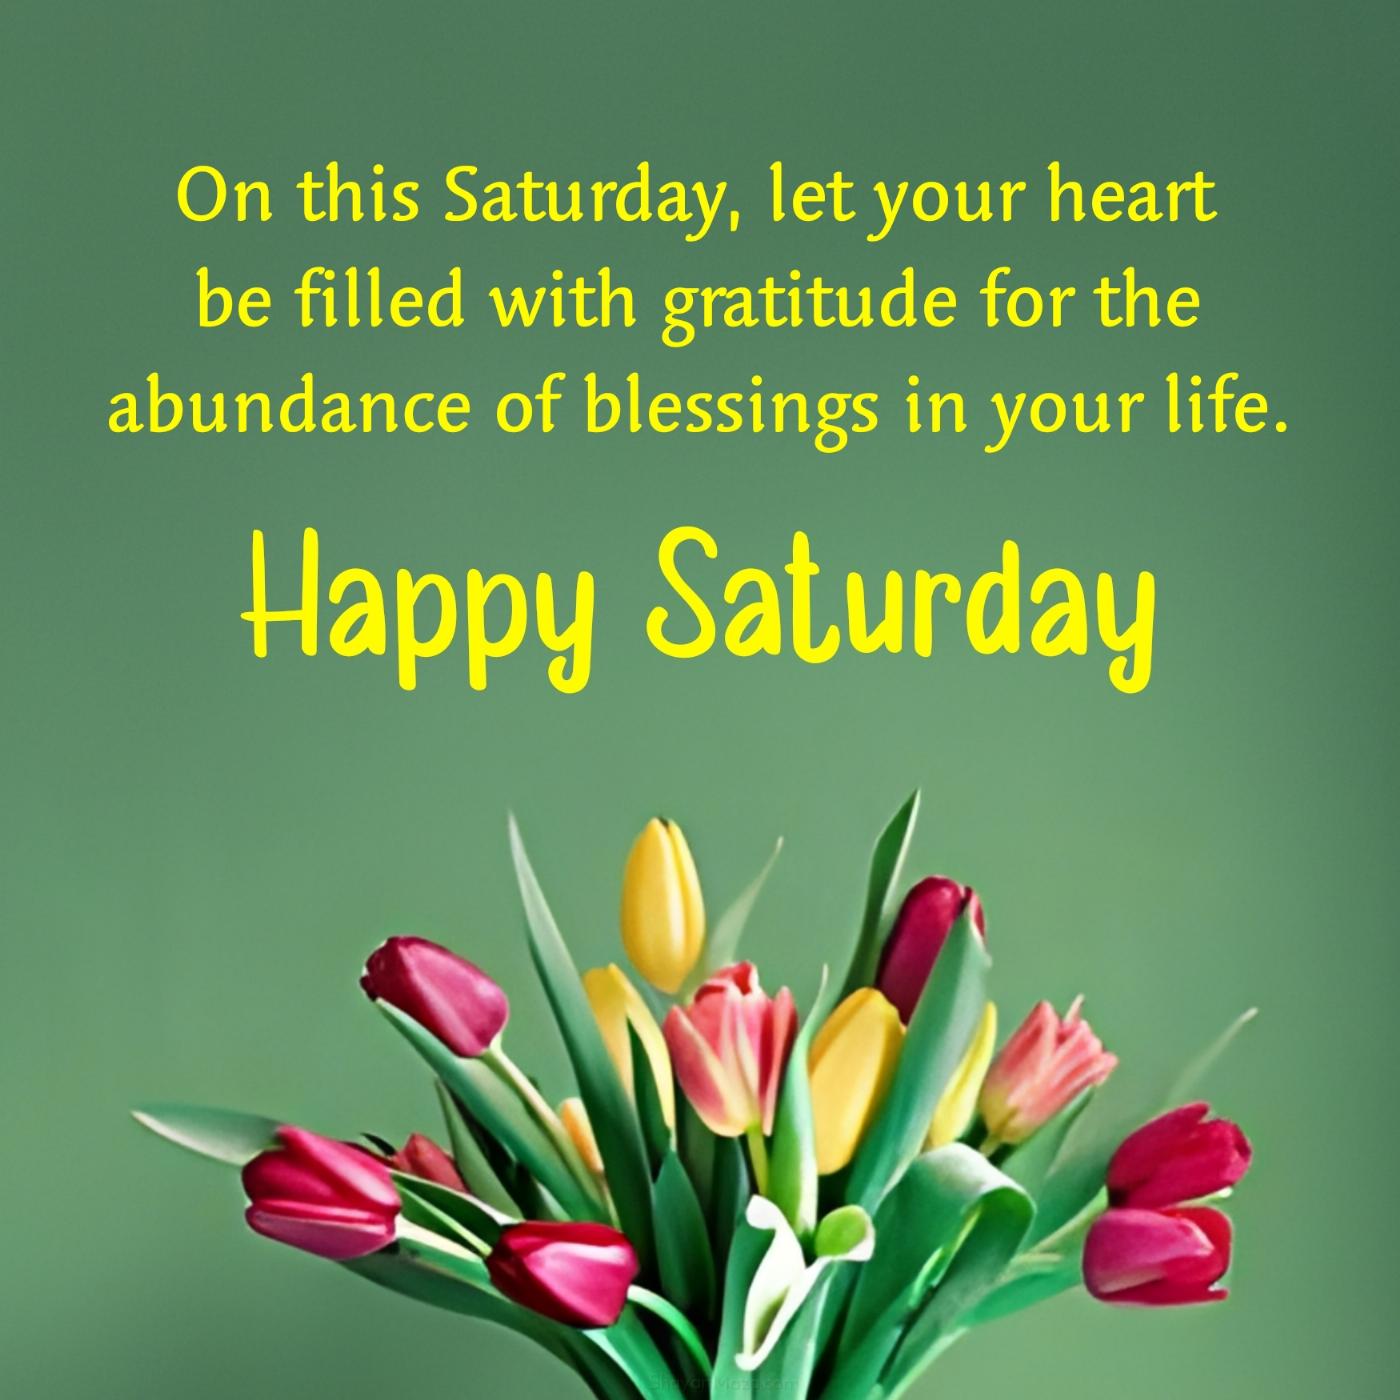 On this Saturday let your heart be filled with gratitude